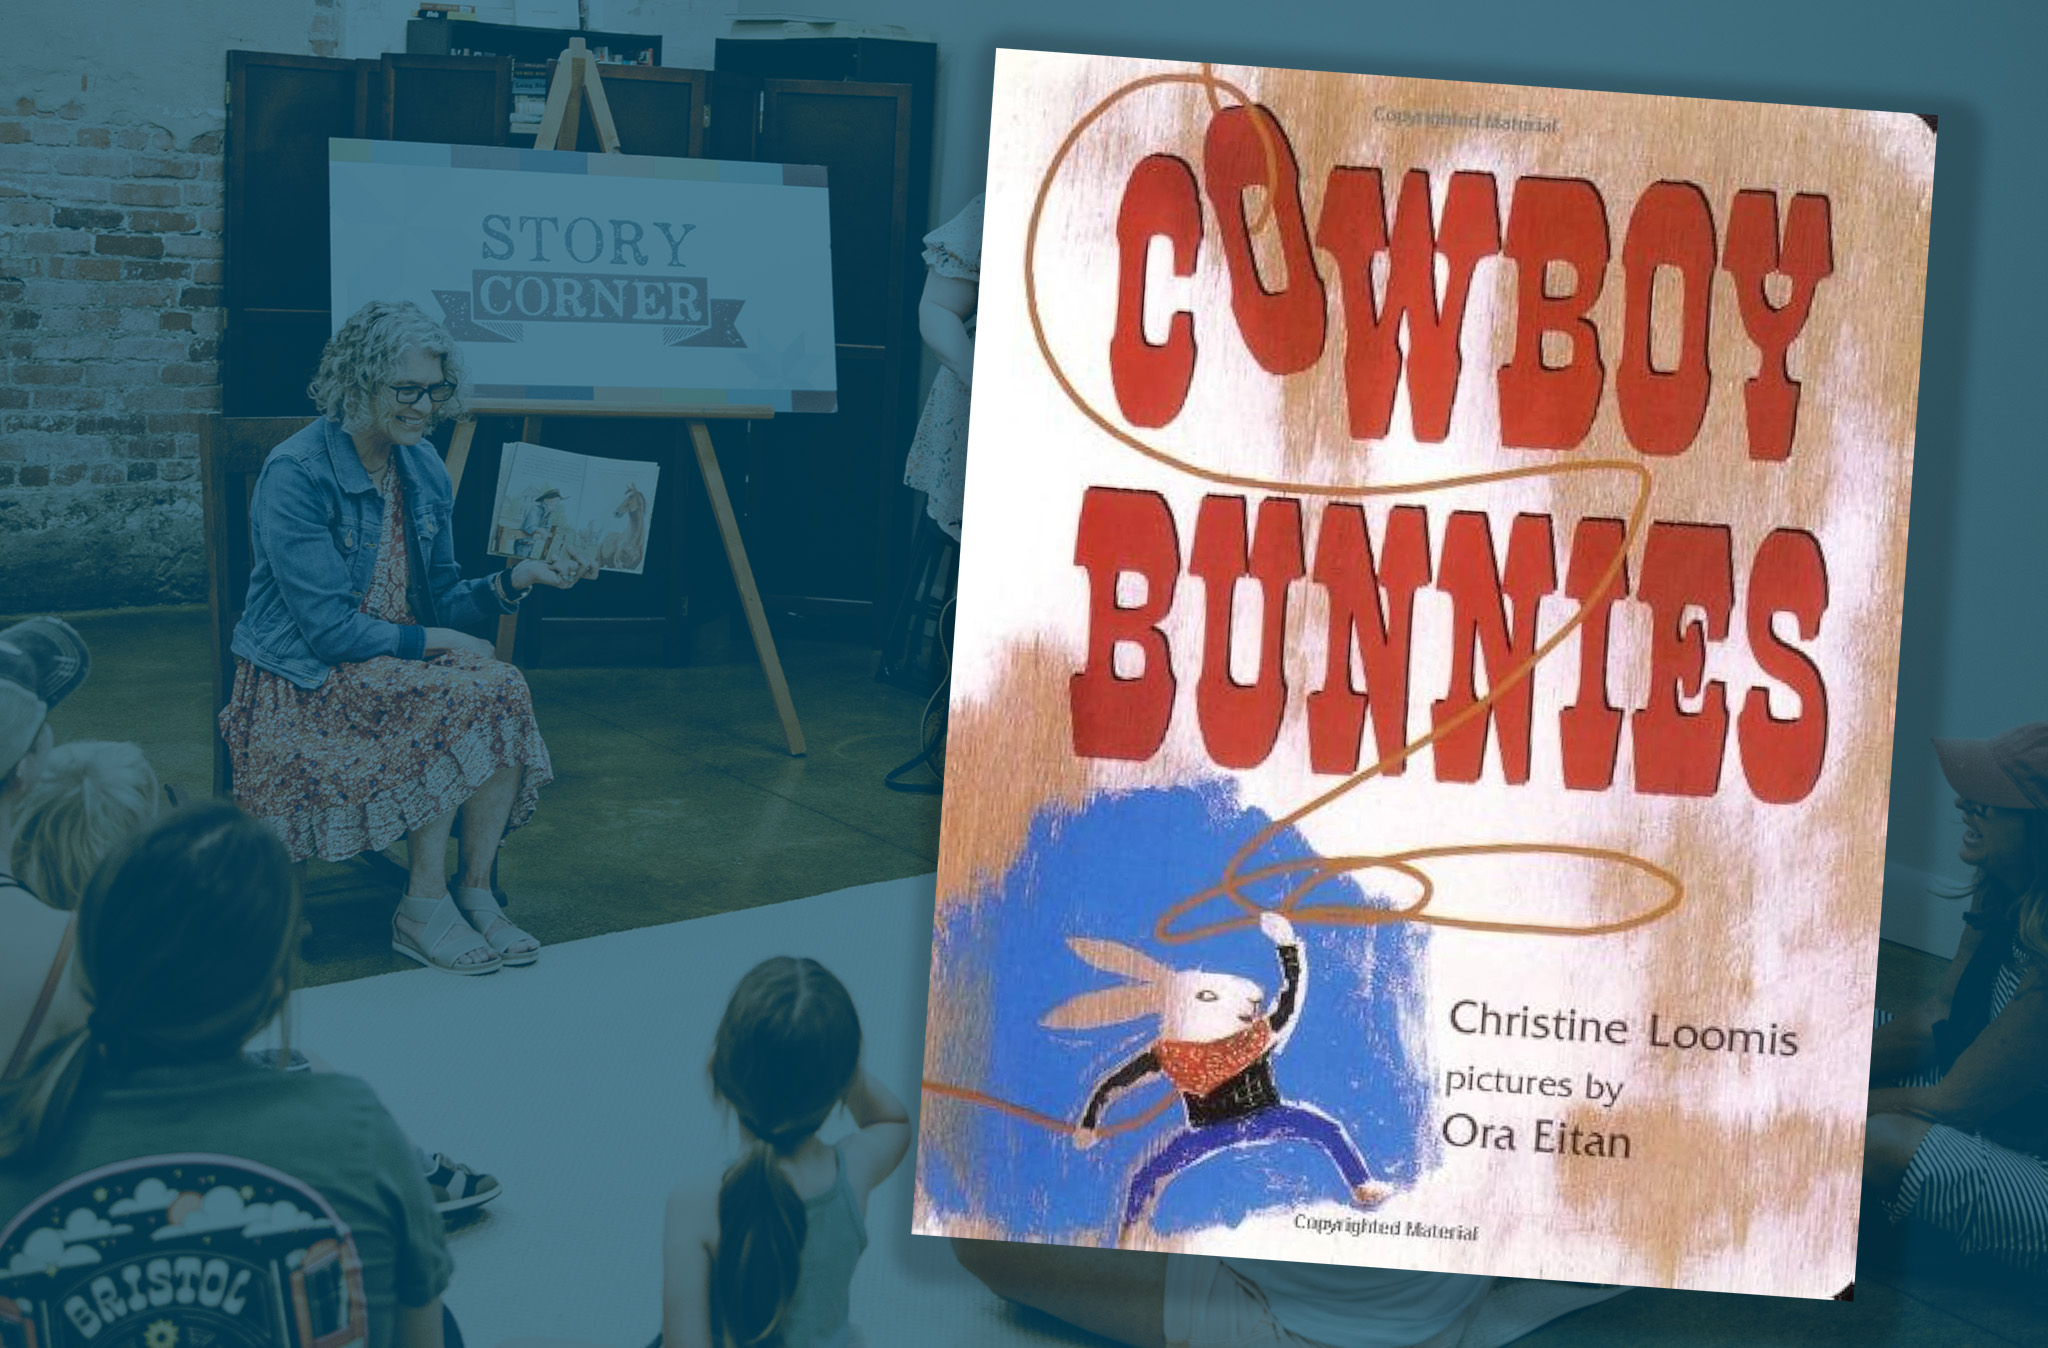 Museum Story Time – “Cowboy Bunnies” by Christine Loomis